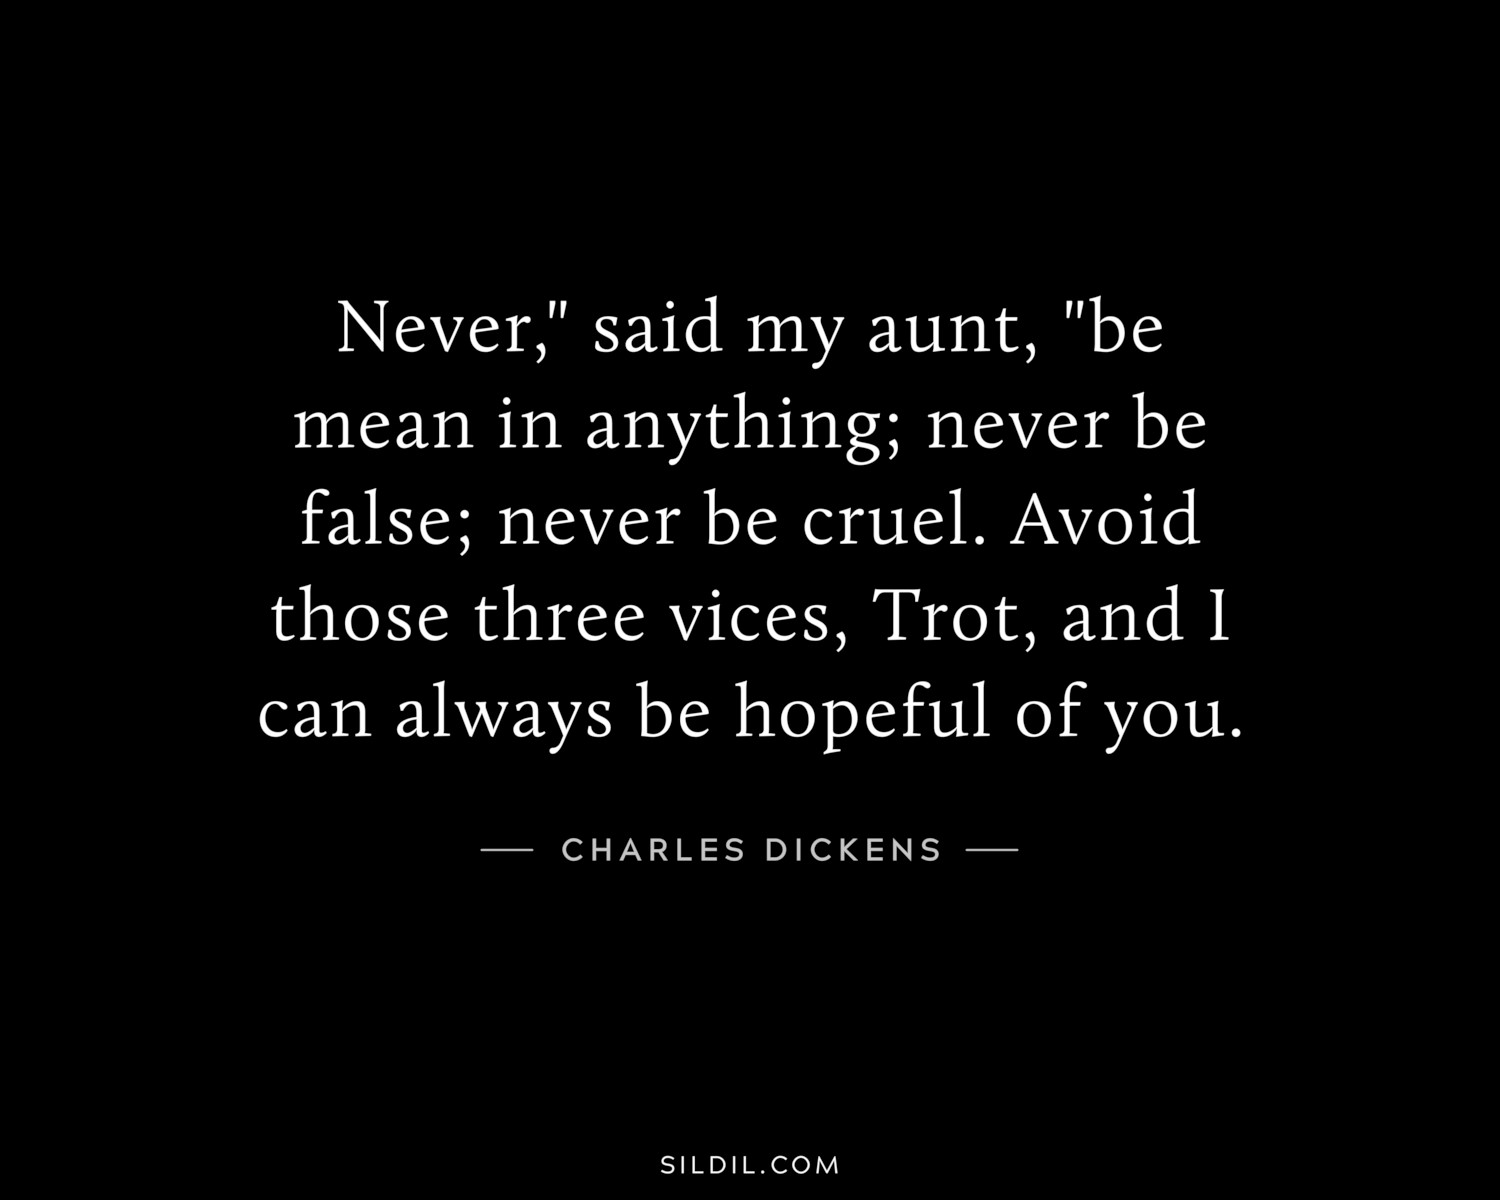 Never," said my aunt, "be mean in anything; never be false; never be cruel. Avoid those three vices, Trot, and I can always be hopeful of you.